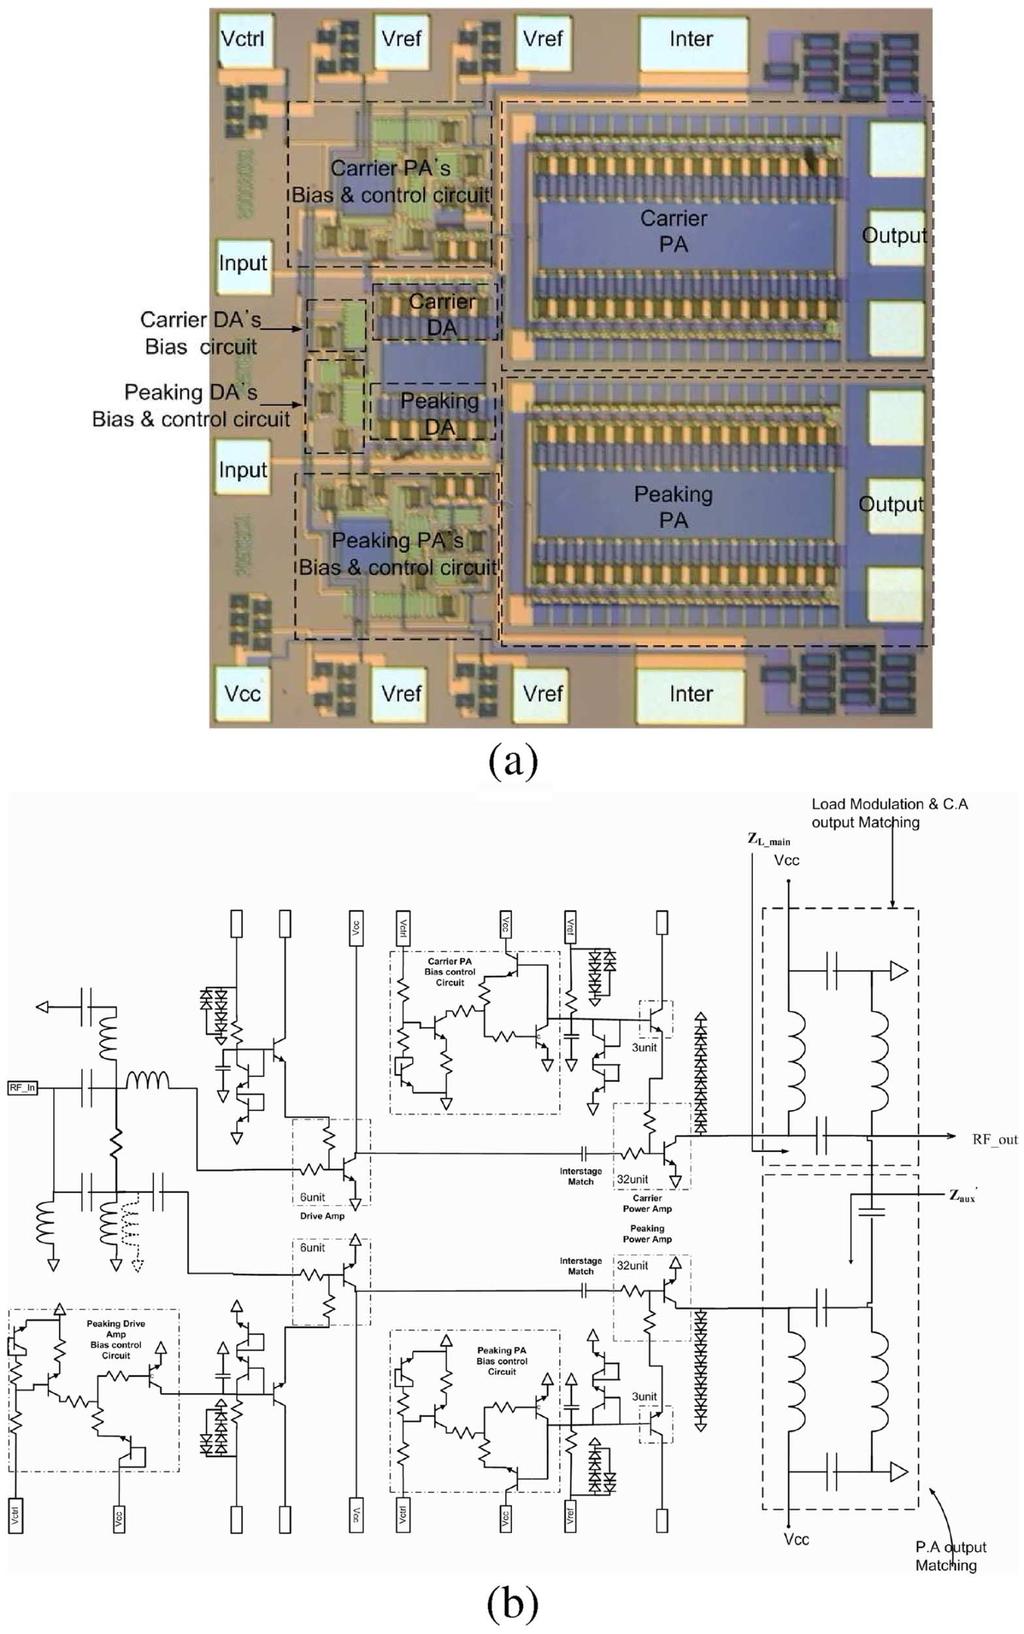 NAM AND KIM: DPA WITH ON-CHIP DYNAMIC BIAS CONTROL CIRCUIT FOR HANDSET APPLICATION 639 Fig. 12. Photograph and full schematic of the MMIC PA. (a) Chip photograph.